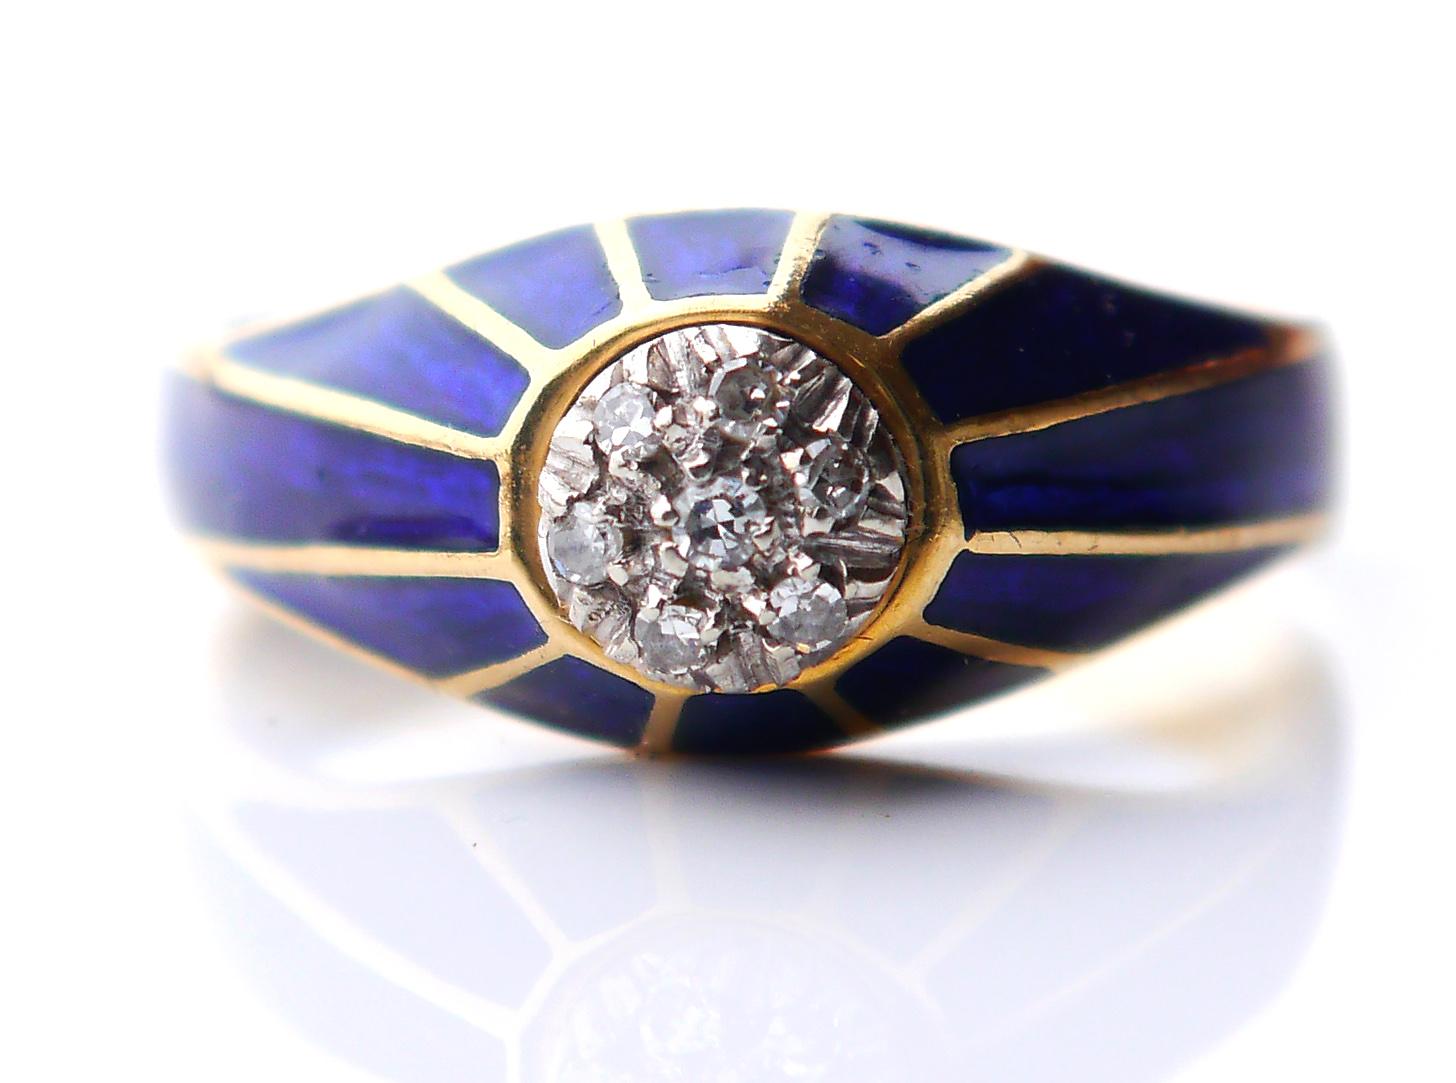 Great looking ring with an attached floret of seven old diamond cut Diamonds pave set in white Gold clusters and surrounded by 12 Blue Enamel panels smoothly conforming down the shoulders to a solid 18K Yellow Gold shank.

Diamonds Ø 1.5mm / 0.015ct